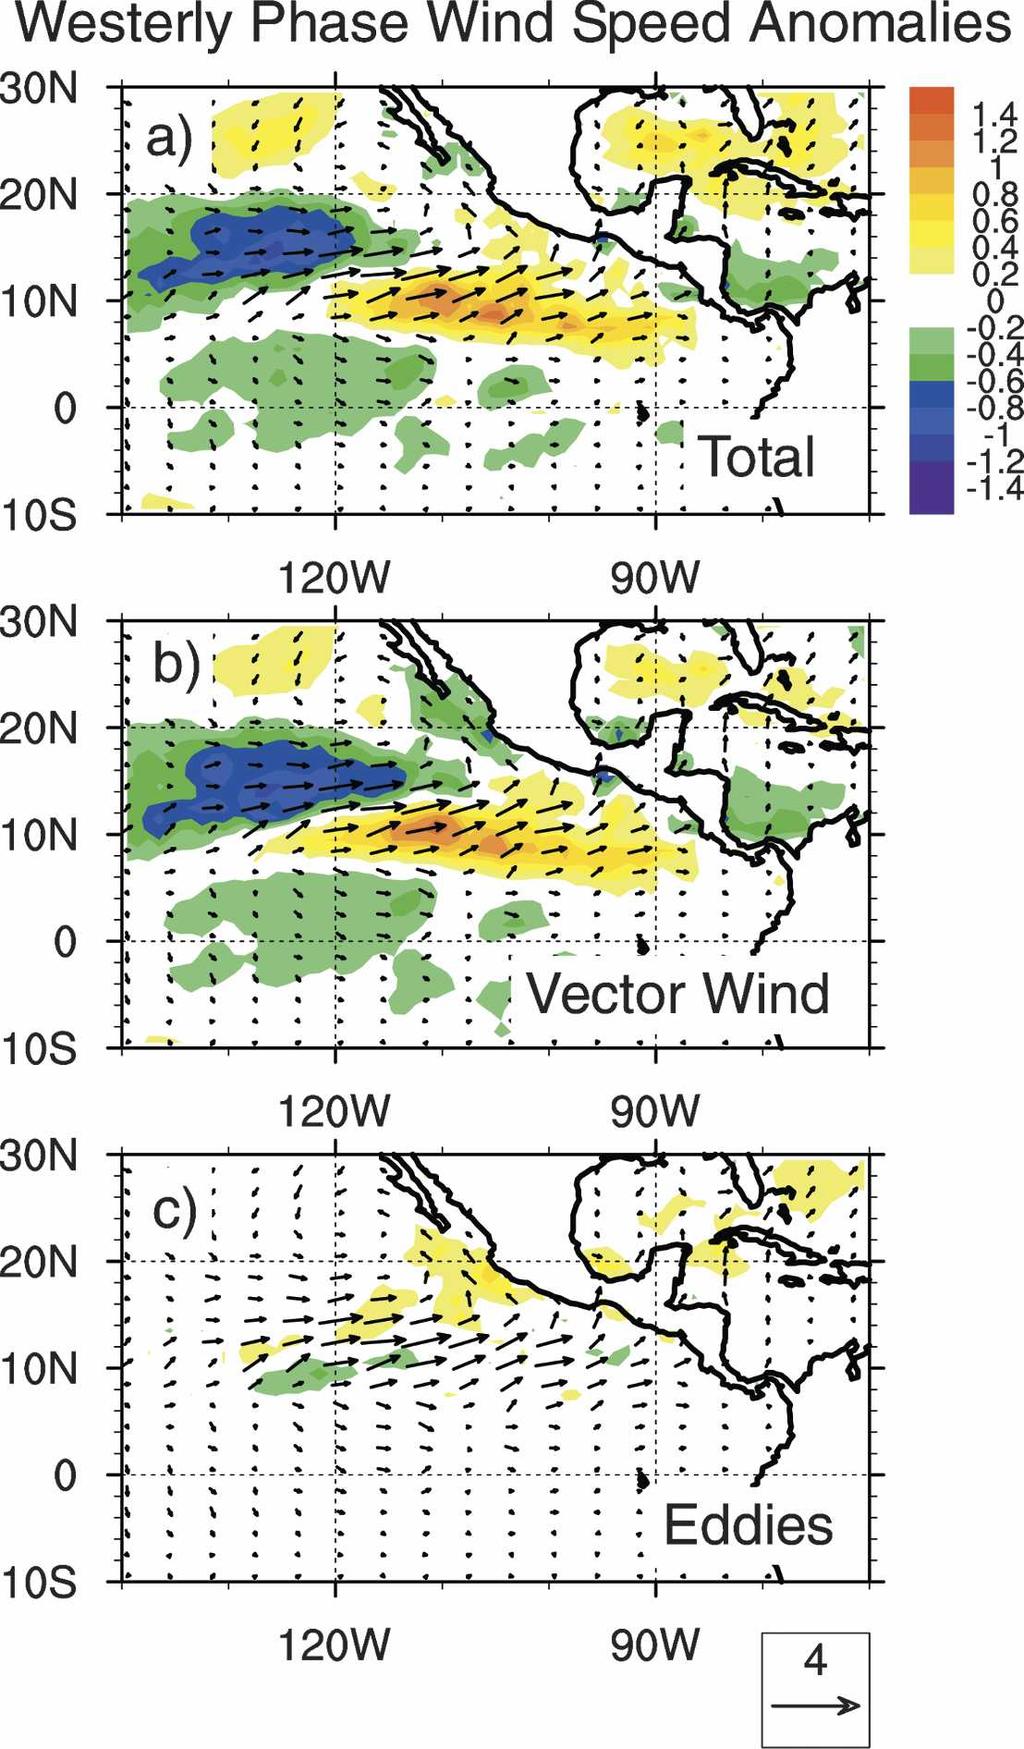 10 M O N T H L Y W E A T H E R R E V I E W VOLUME 135 FIG. 4. (a) Composite intraseasonal wind speed anomaly for the ISO easterly (convectively suppressed) phase.